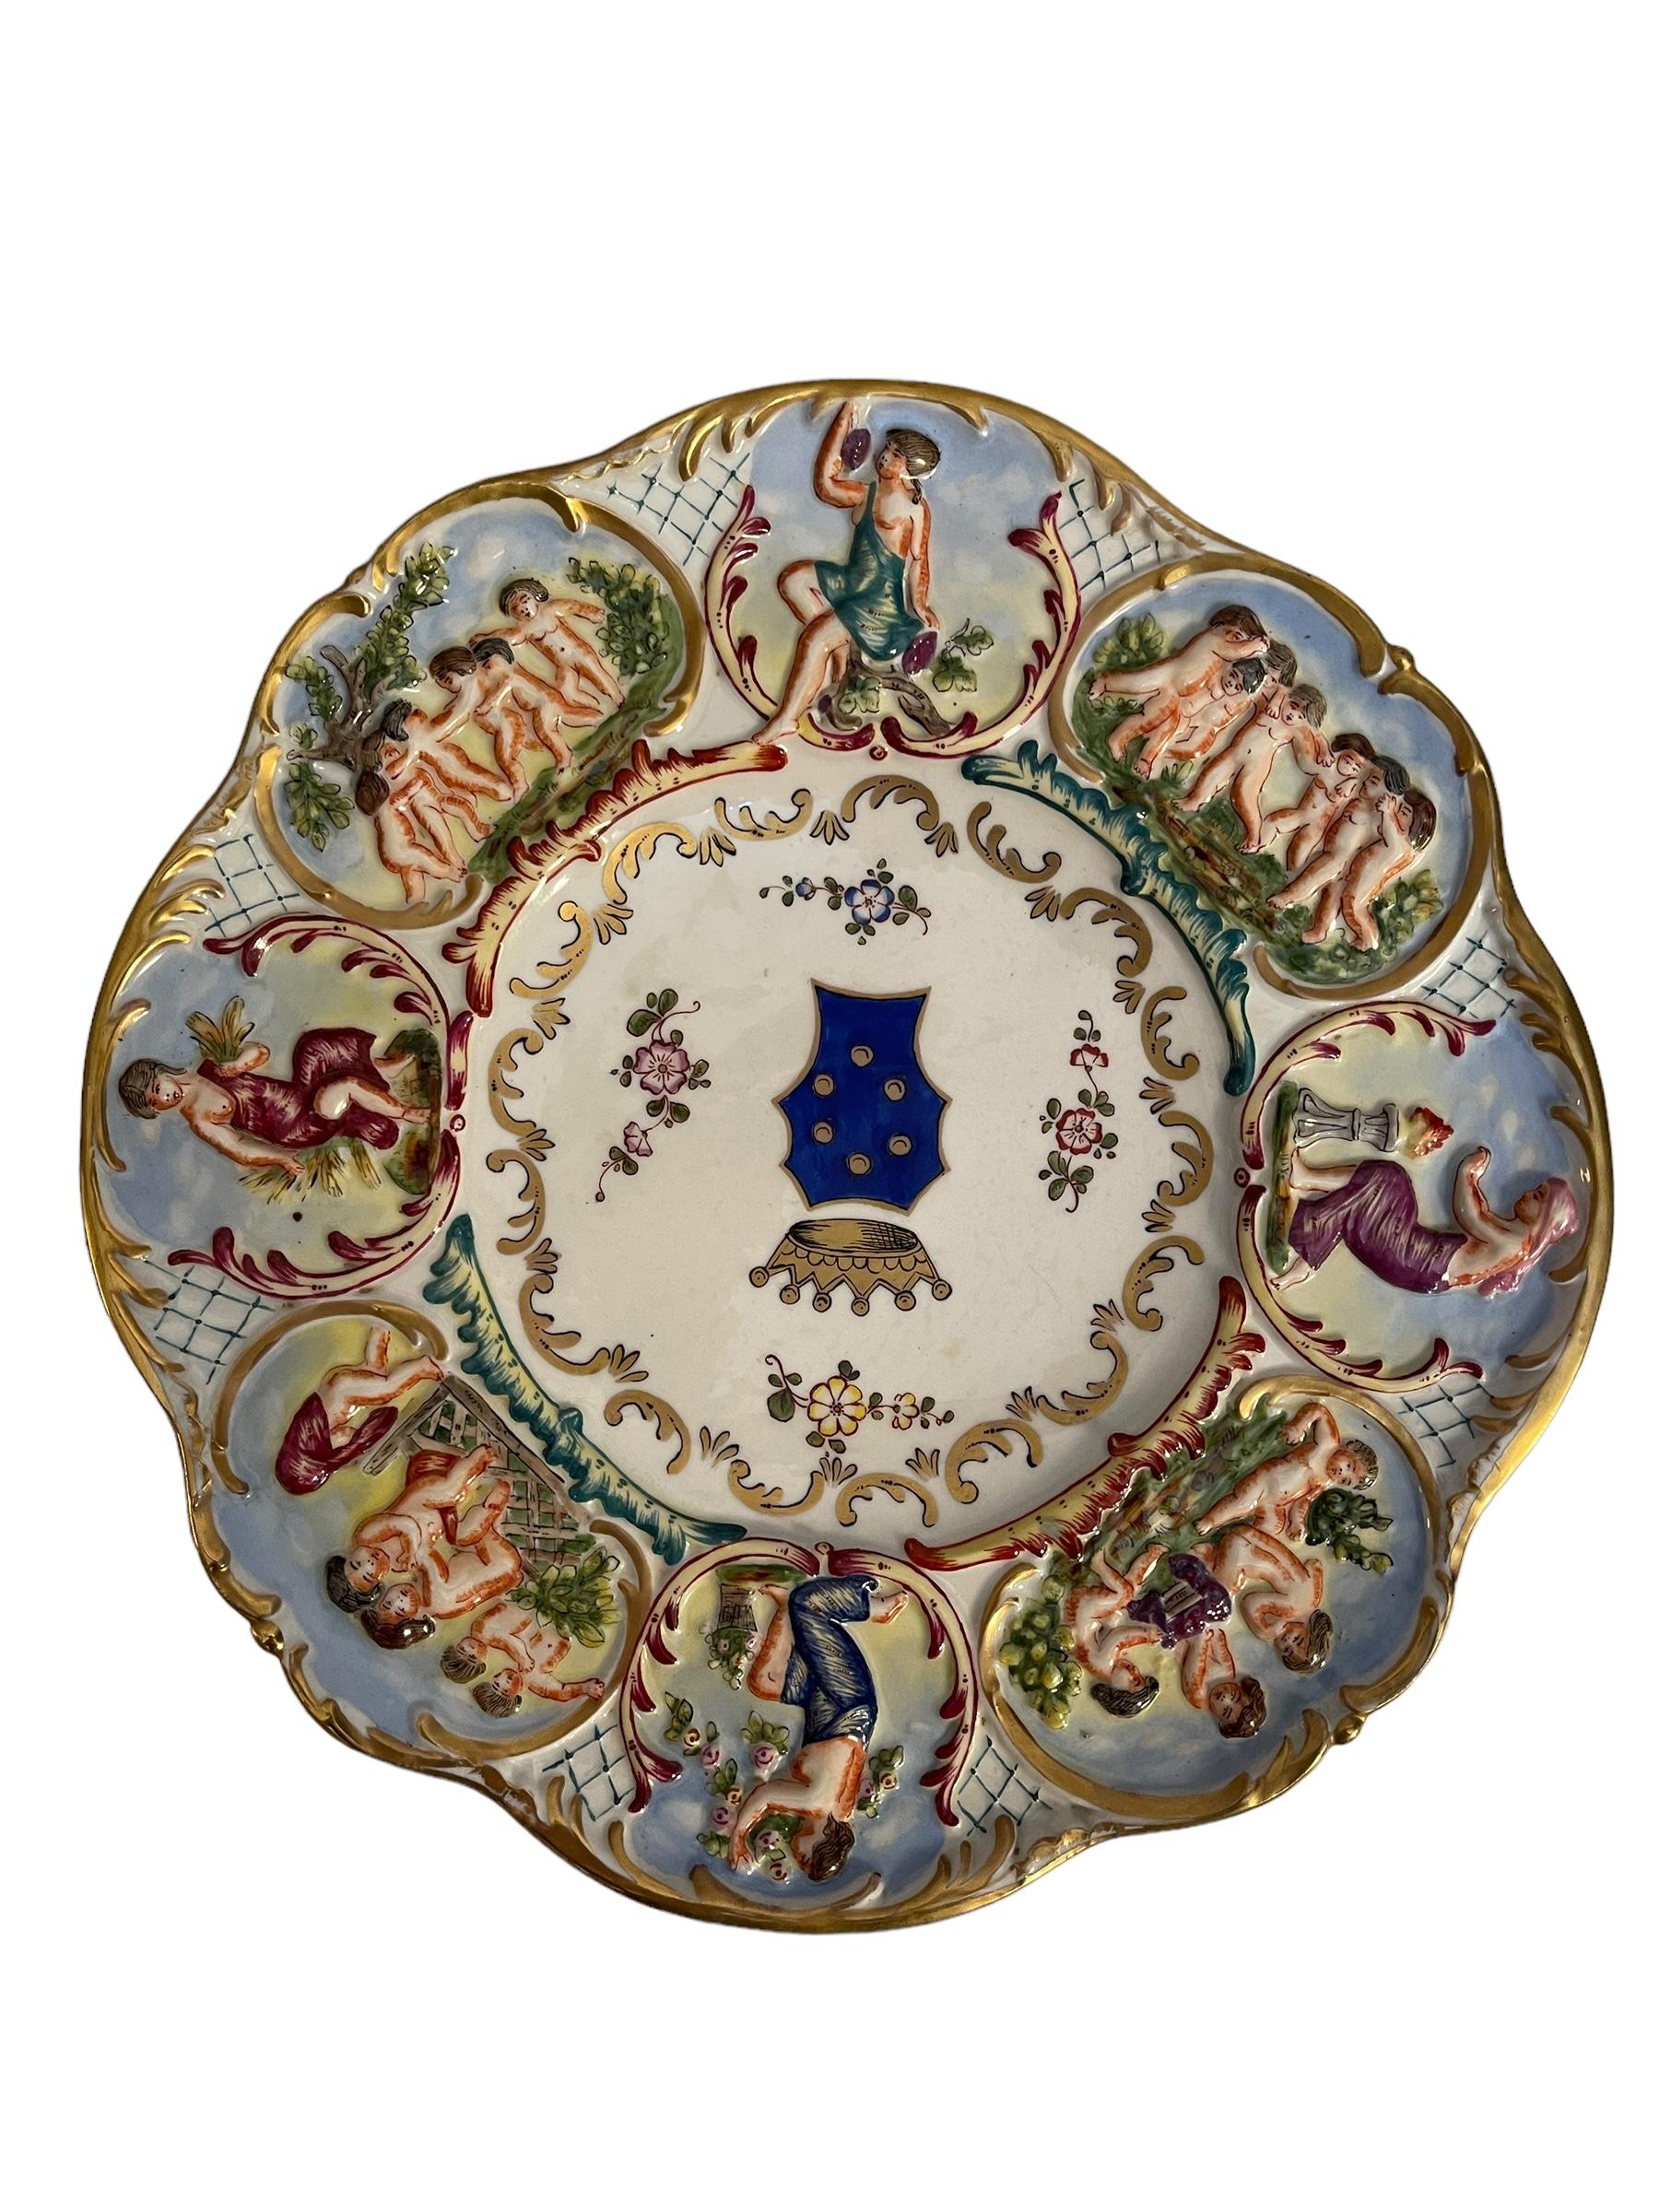 The plate is worked in relief and painted by hand, it has a white base, golden decoration with floral motifs in the center, with coat of arms, and a rich workmanship along the contour, with figures, scenes of daily life, the four seasons, of